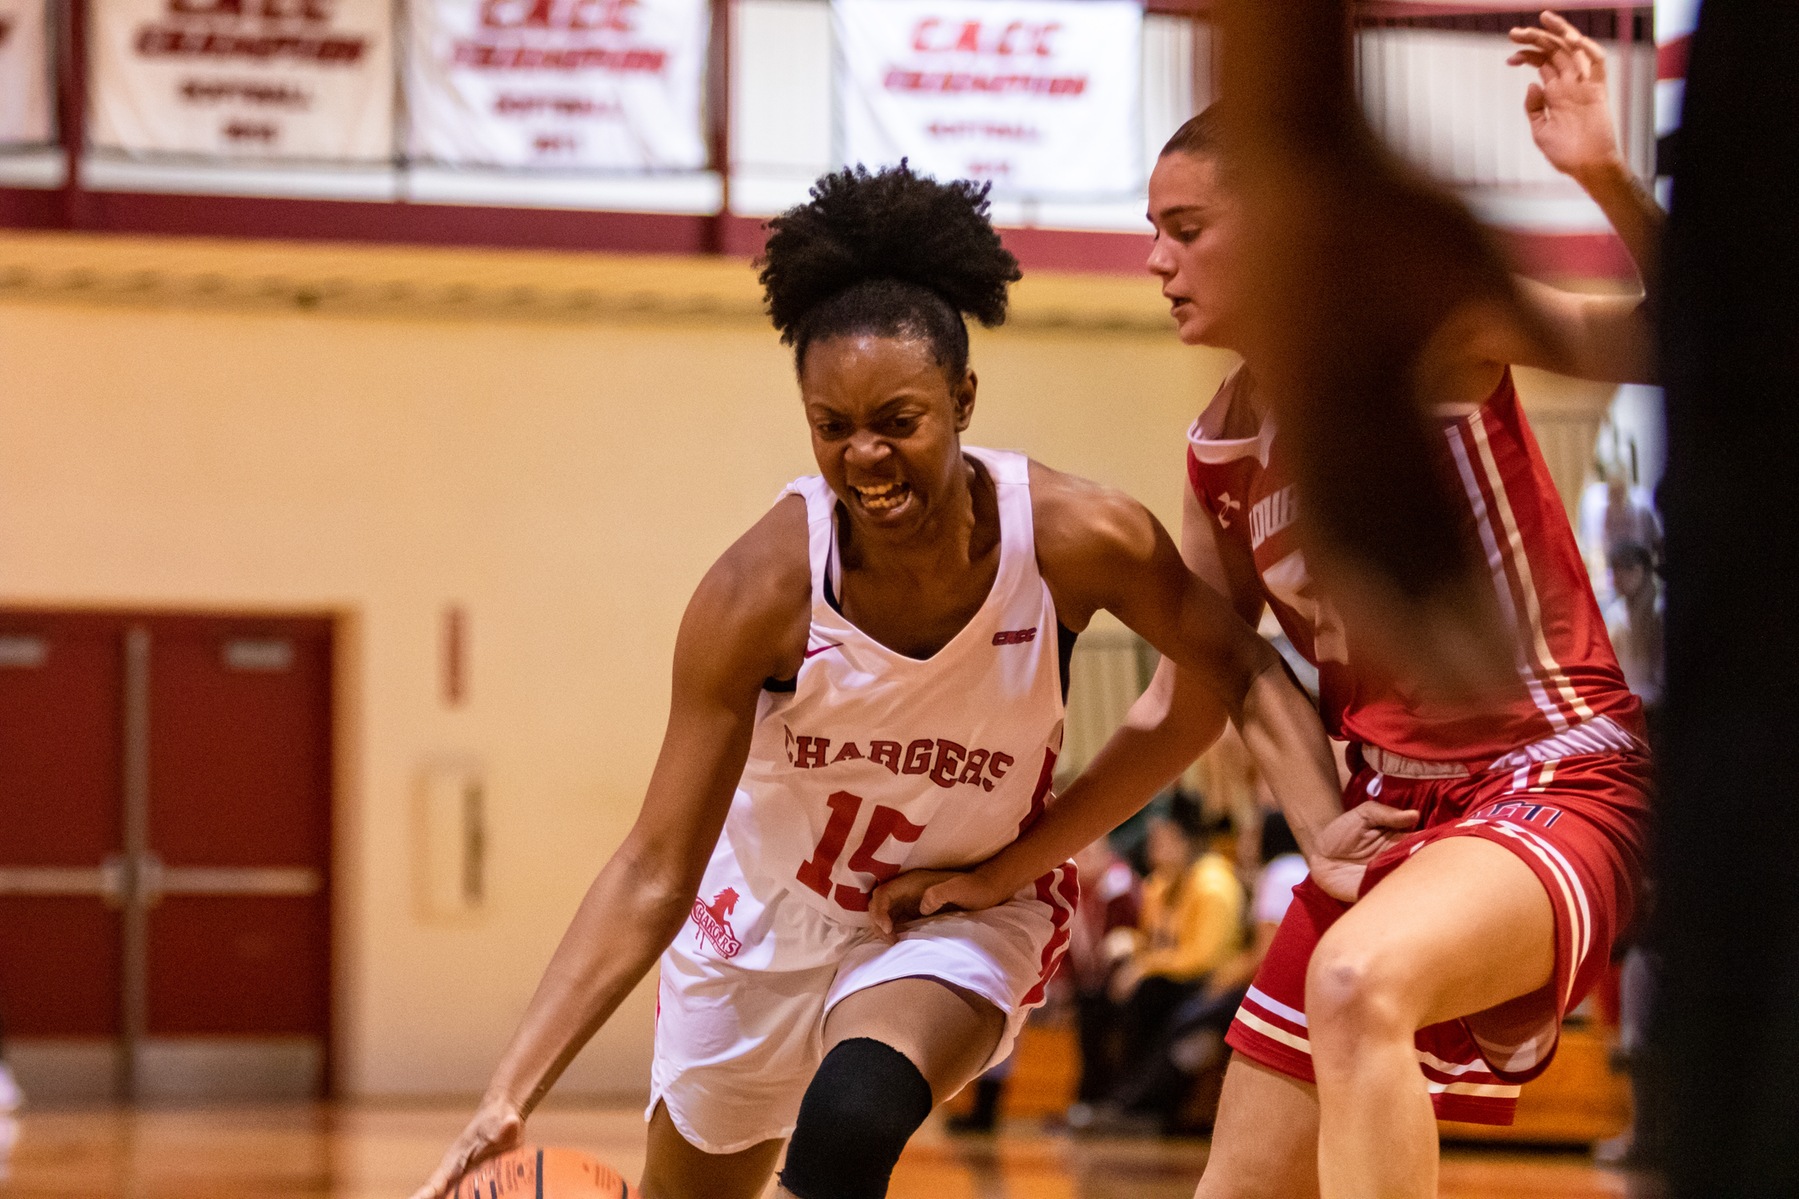 LADY CHARGERS EARN FOURTH STRAIGHT WIN AFTER THRILLING VICTORY OVER JEFFERSON UNIVERSITY